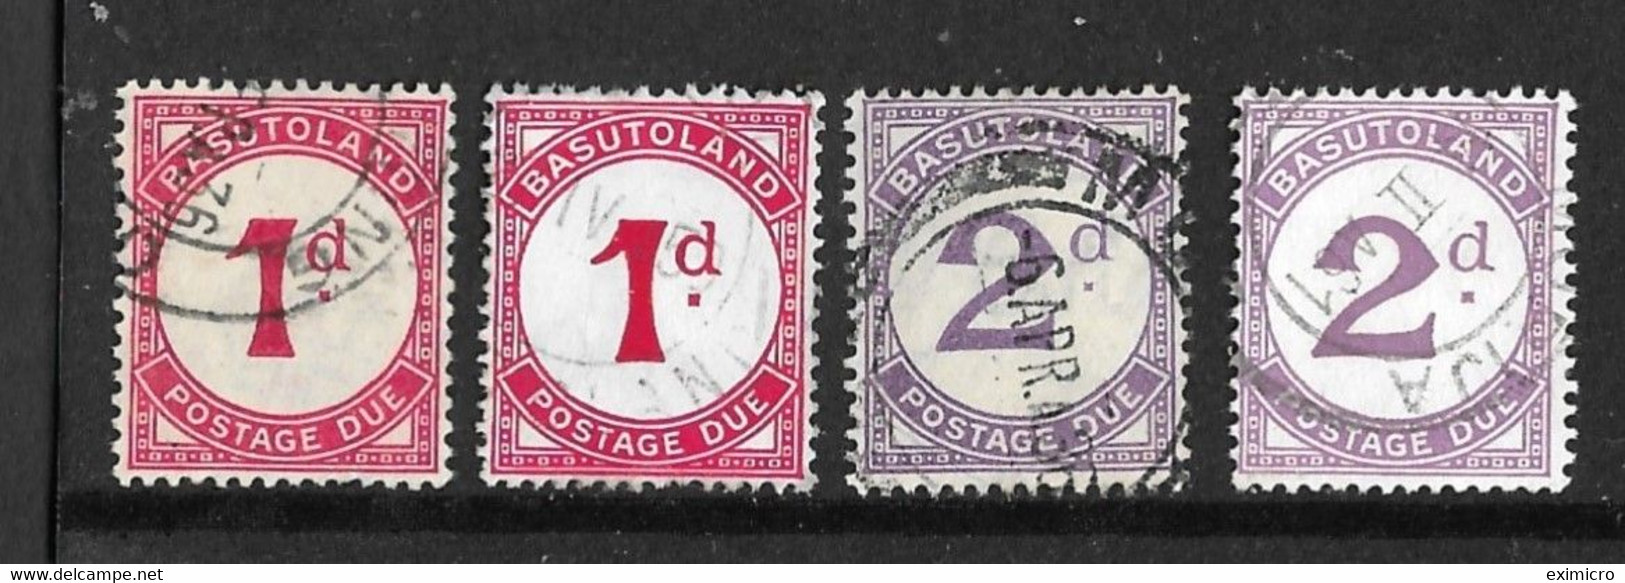 BASUTOLAND 1933 - 1952 POSTAGE DUE SET SG D1, D1b, D2, D2a BOTH ORDINARY AND CHALK-SURFACED PAPERS FINE USED Cat £92 - Strafport